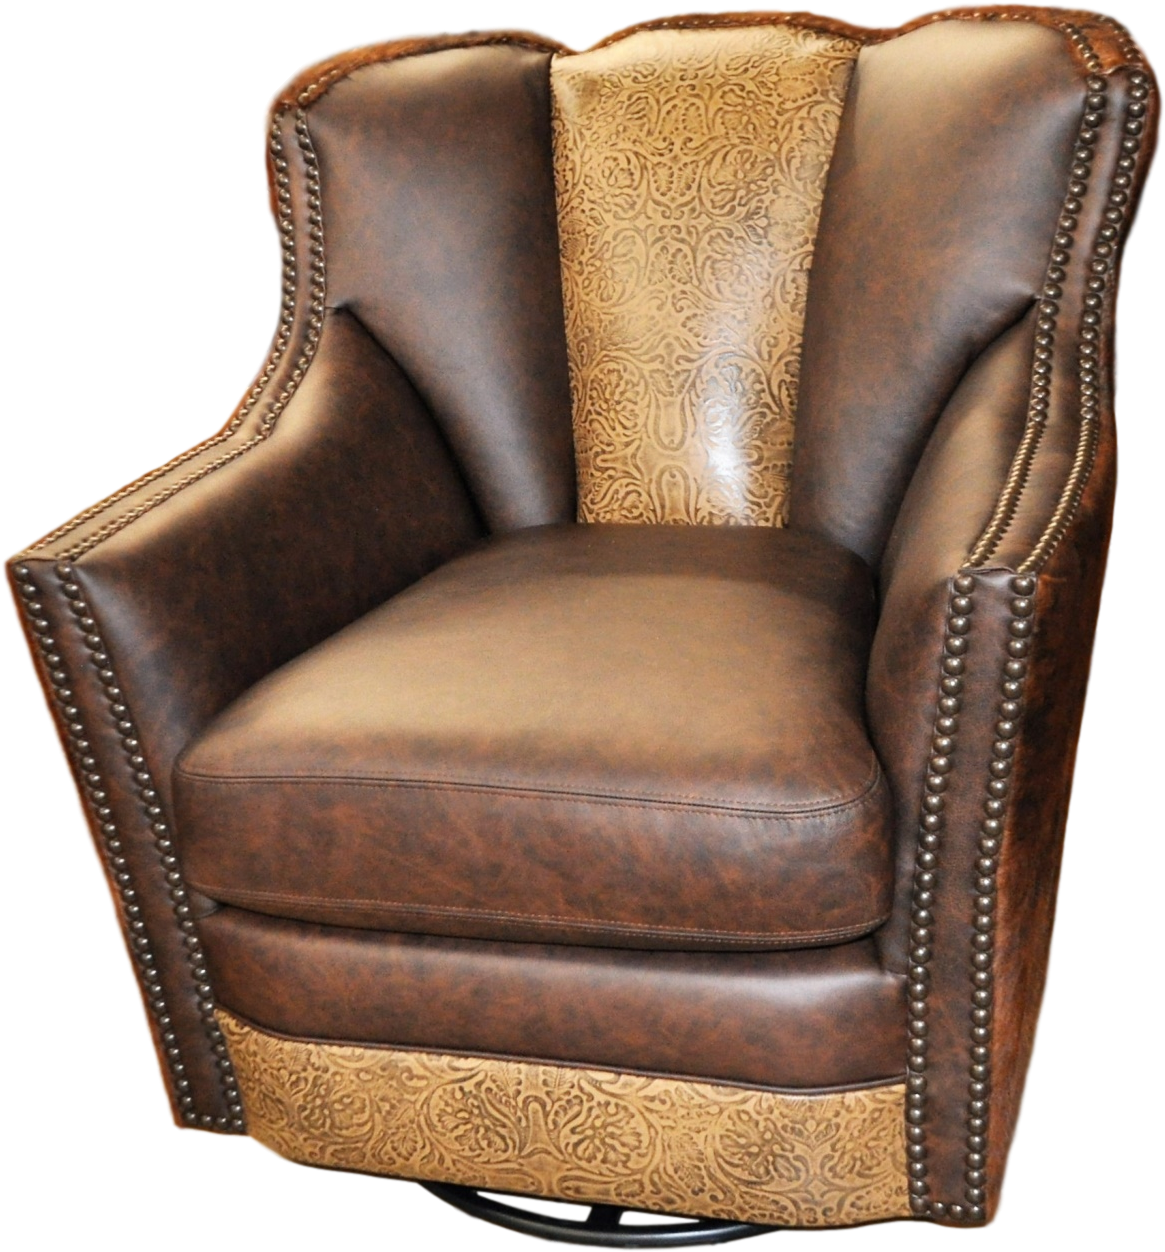 Vintage Leather Club Chair PNG image